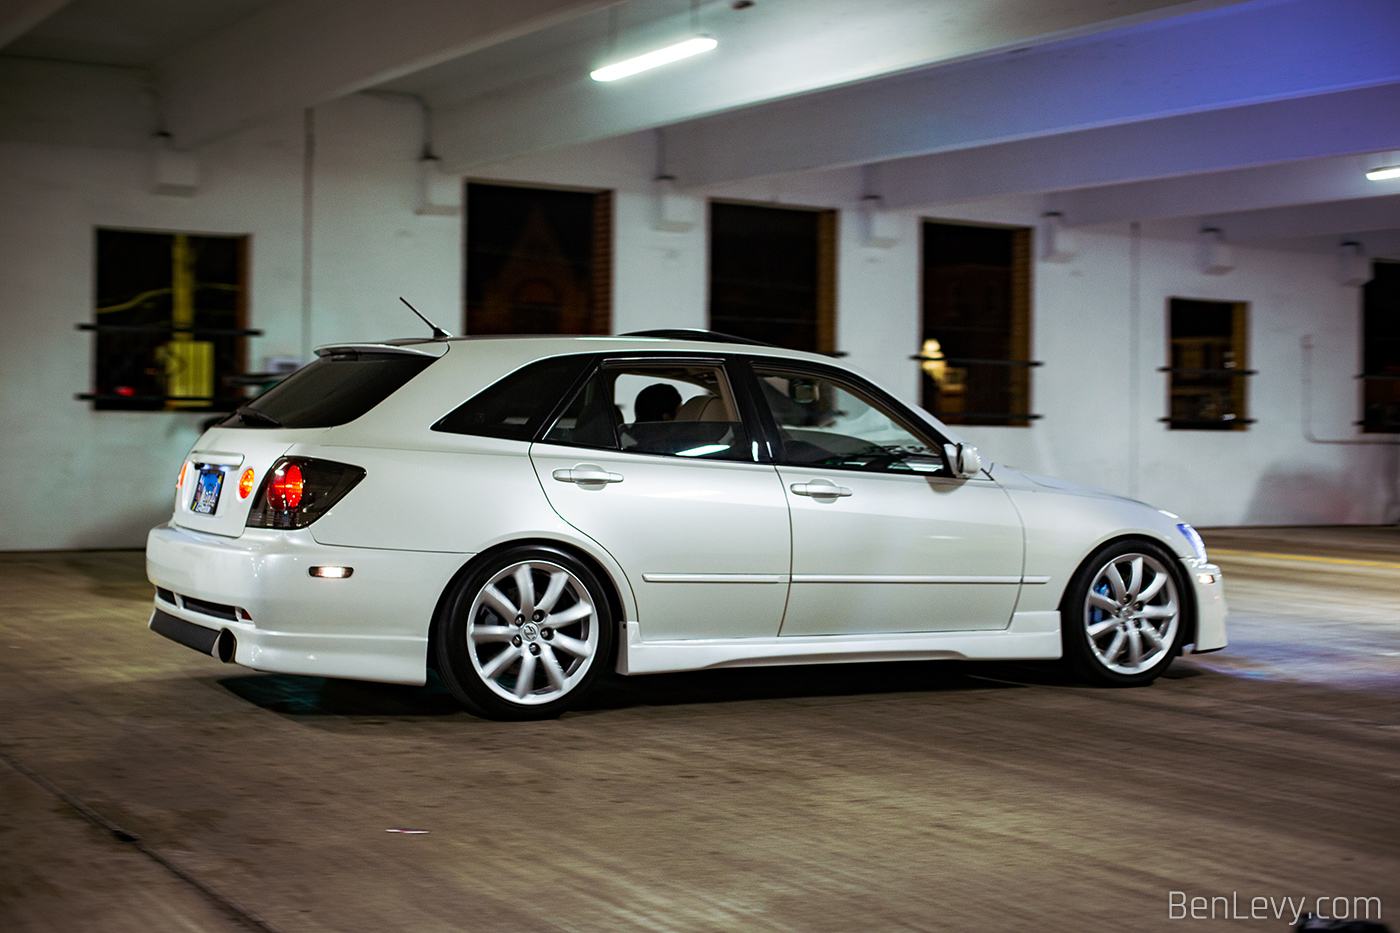 White Lexus IS300 Wagon at the Parking Garage Party